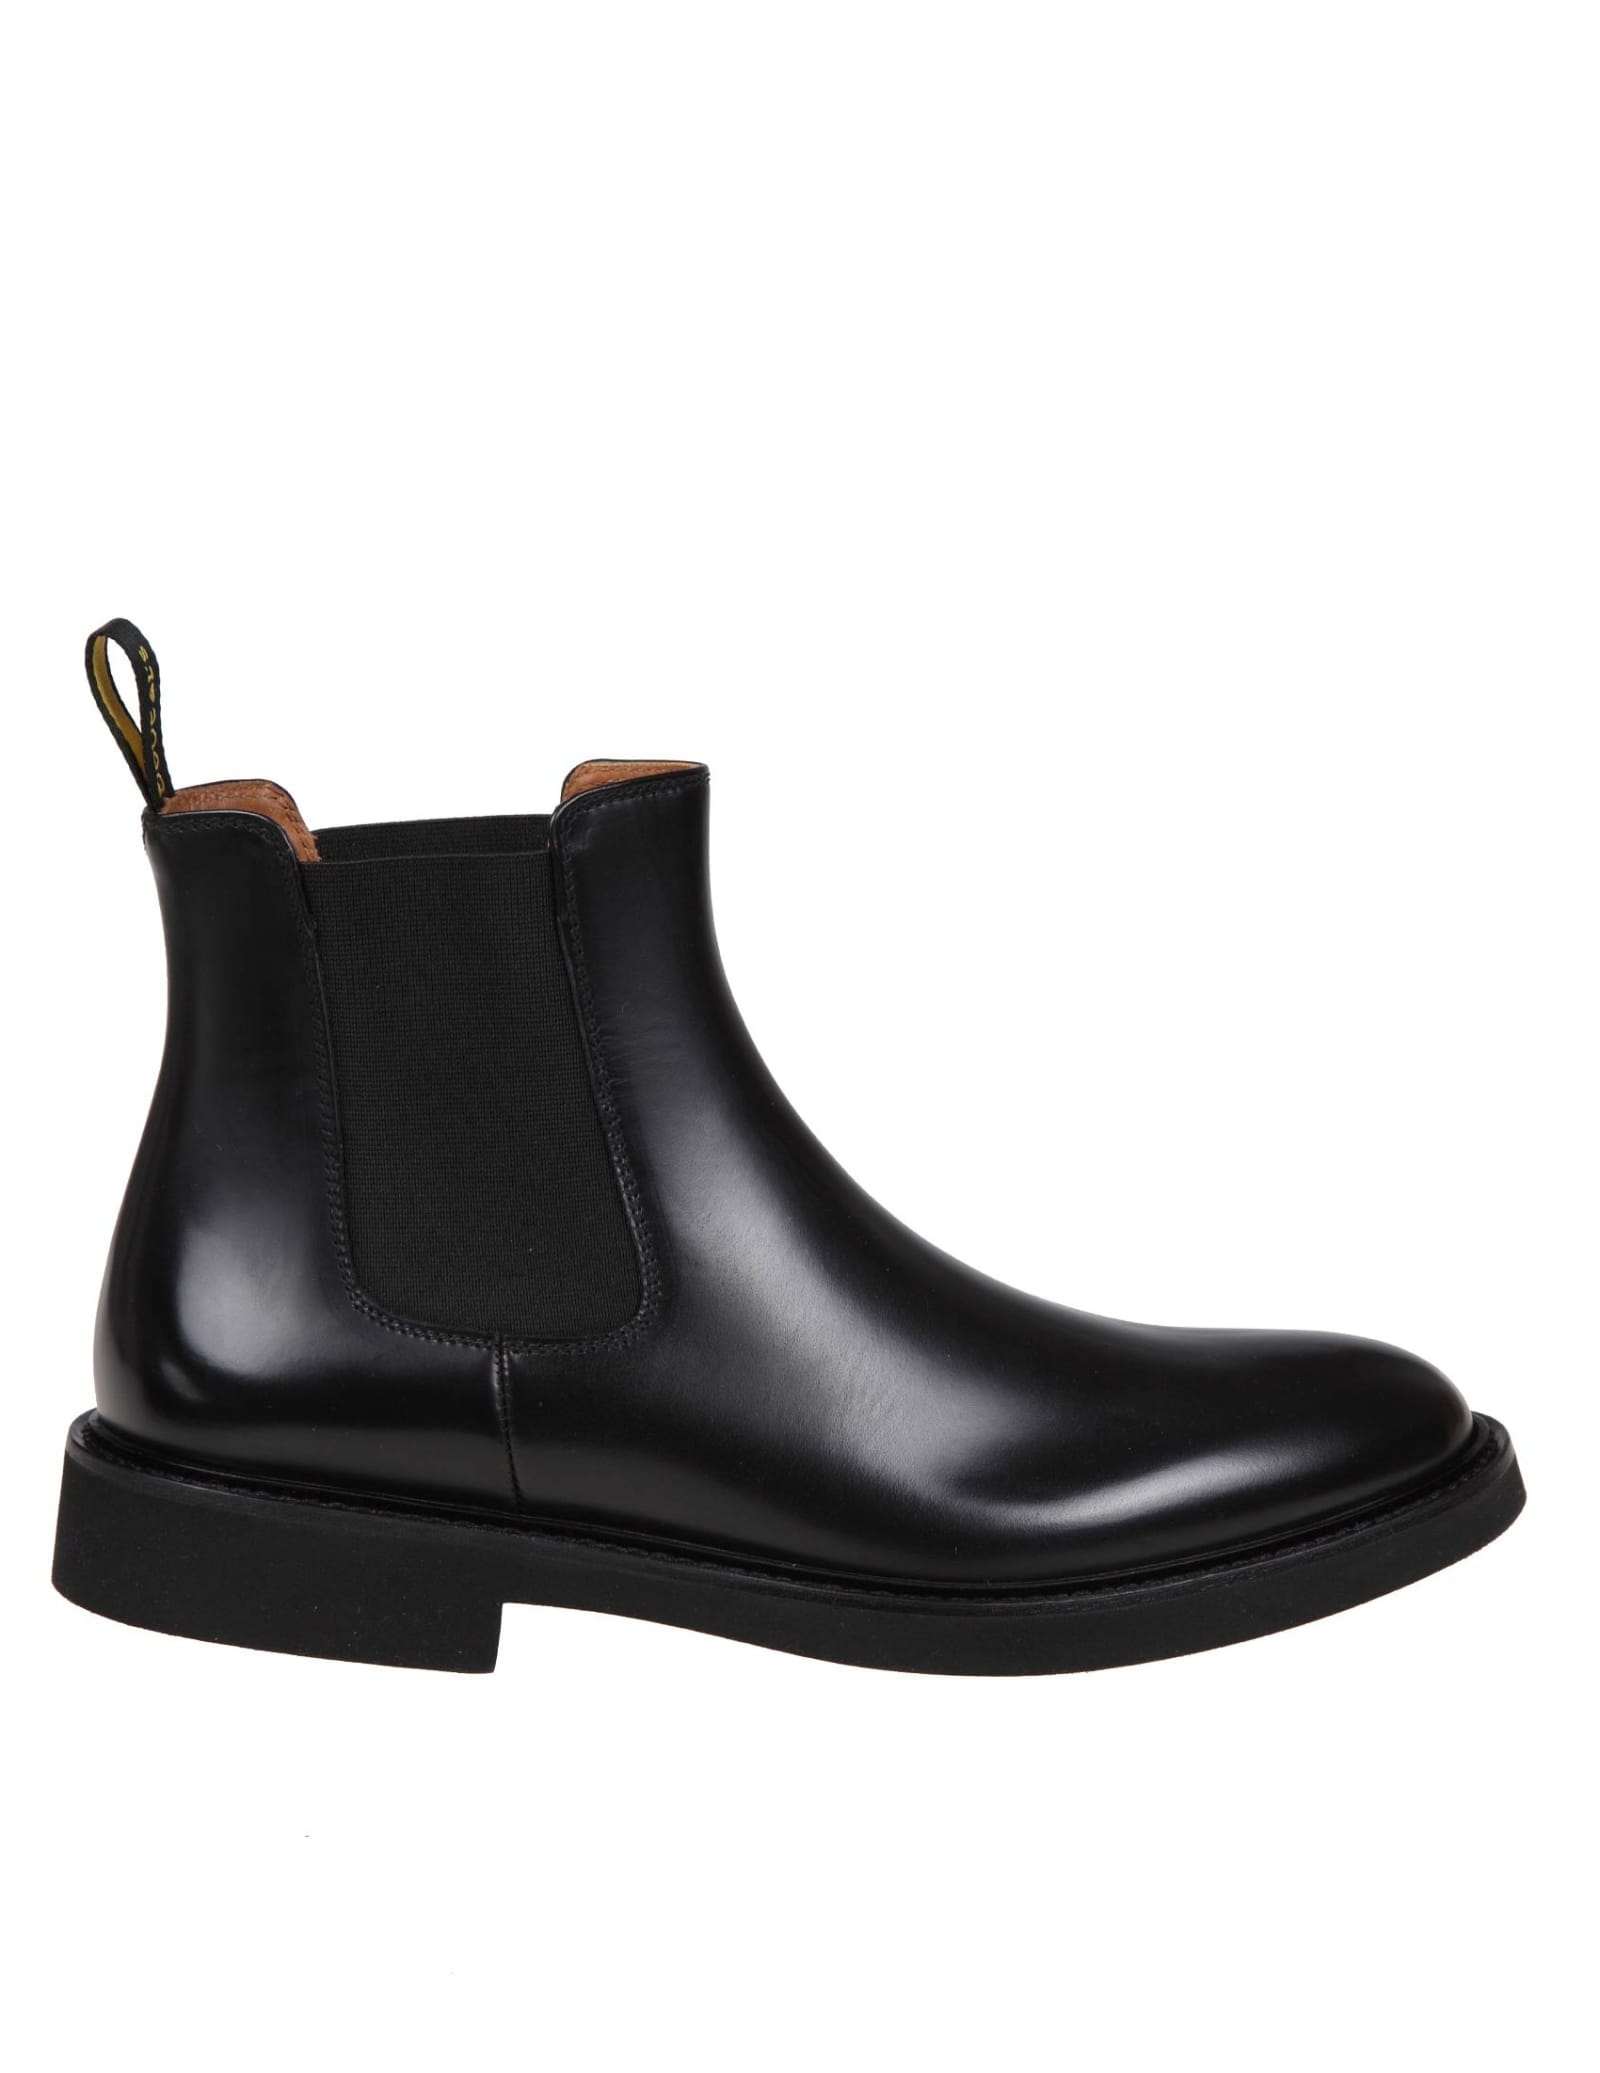 DOUCAL'S BLACK LEATHER CHELSEA ANKLE BOOT